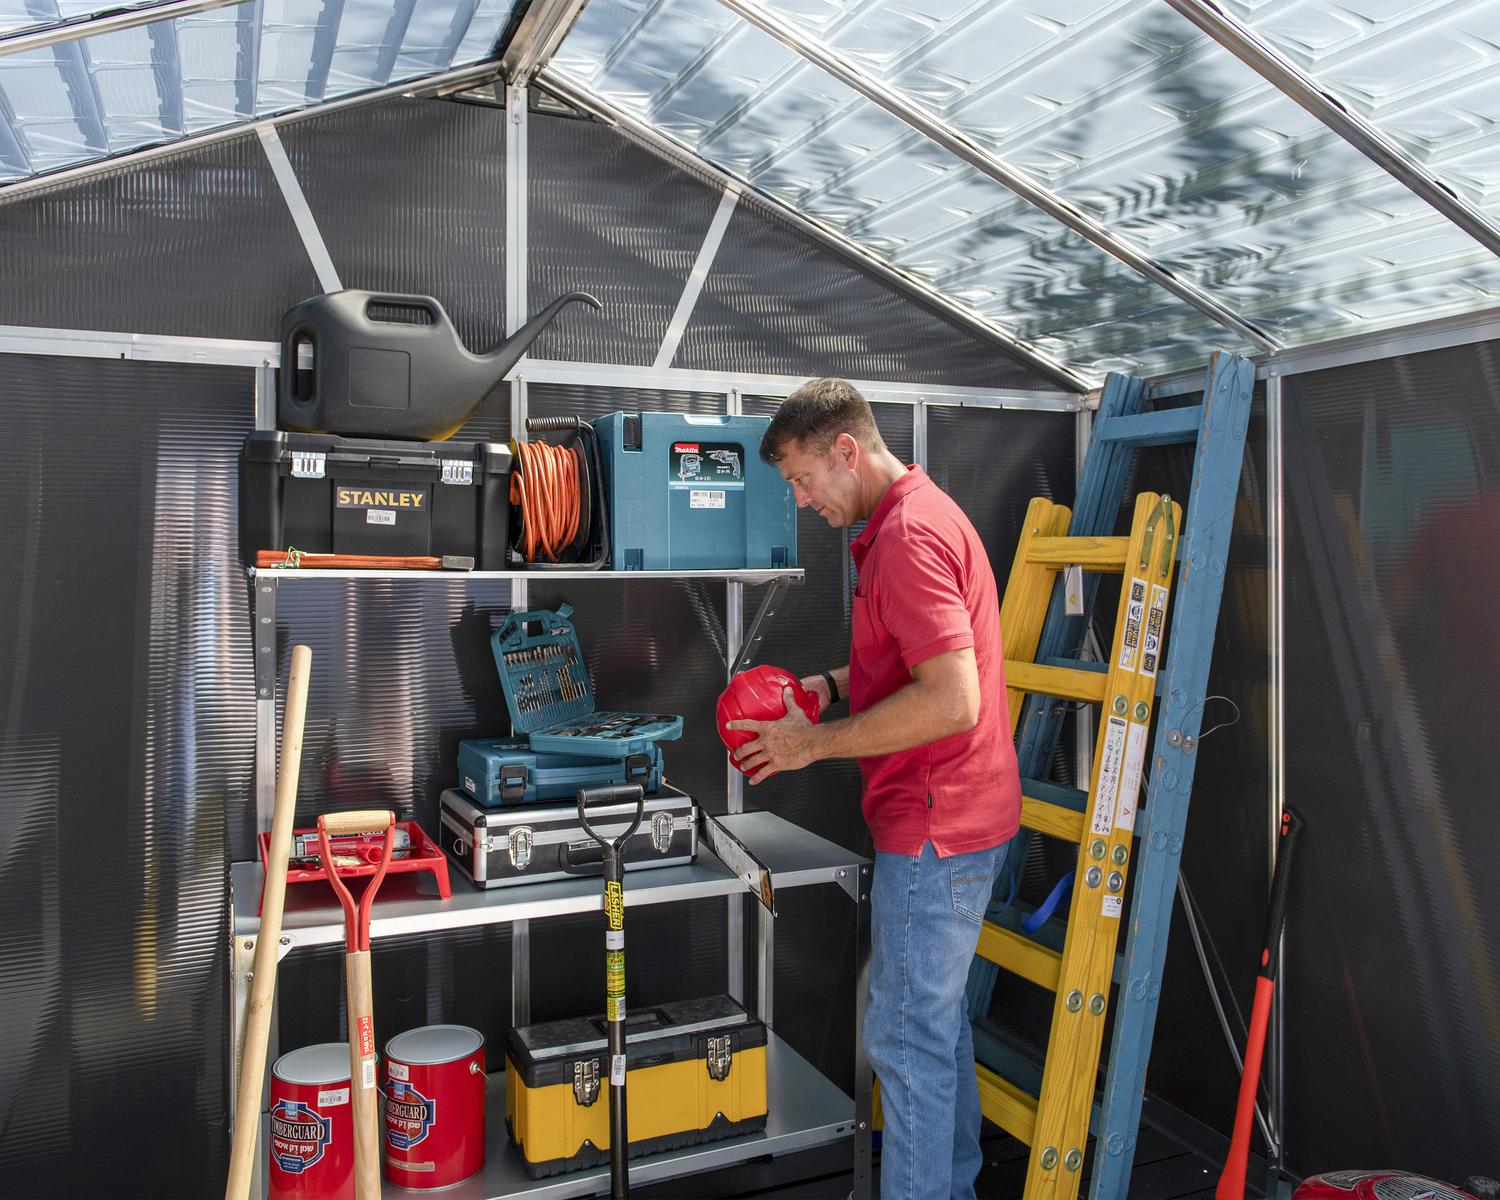 Organizing of tools in large Plastic storage shed with a skylight roof